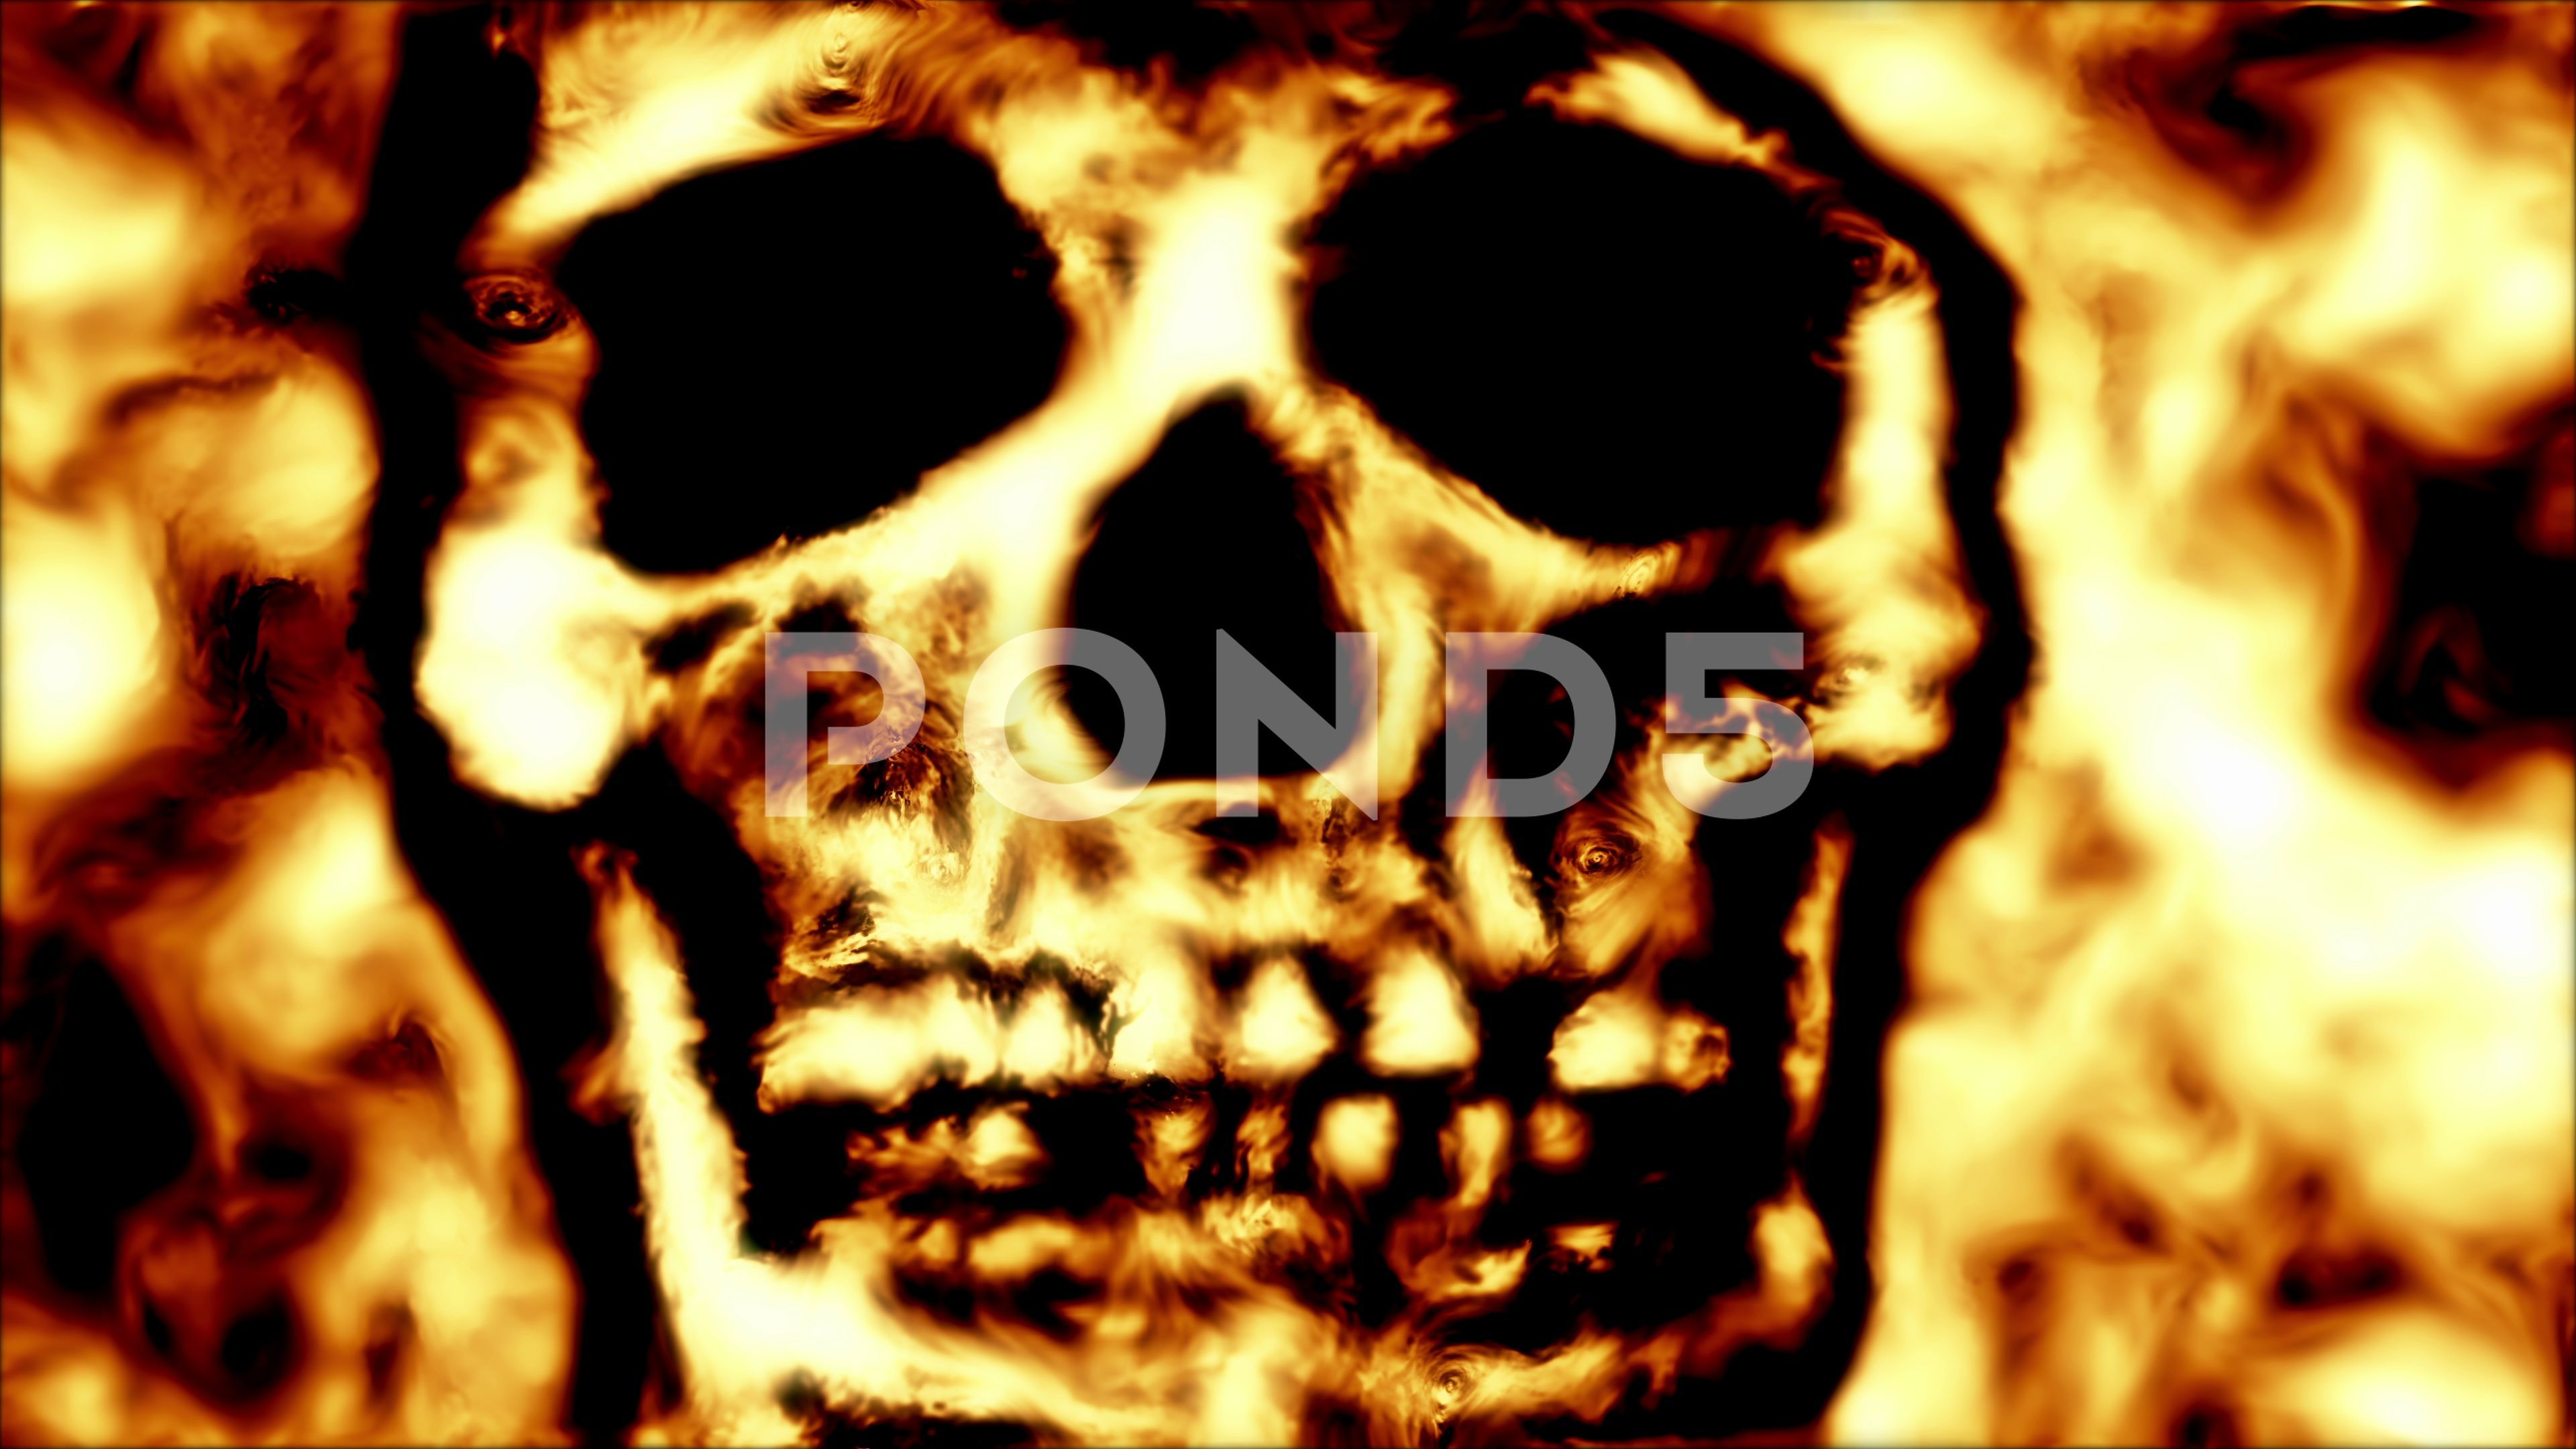 Fireplace Background New Skull Close Up In A Fire Like Background 4k Stock Footage